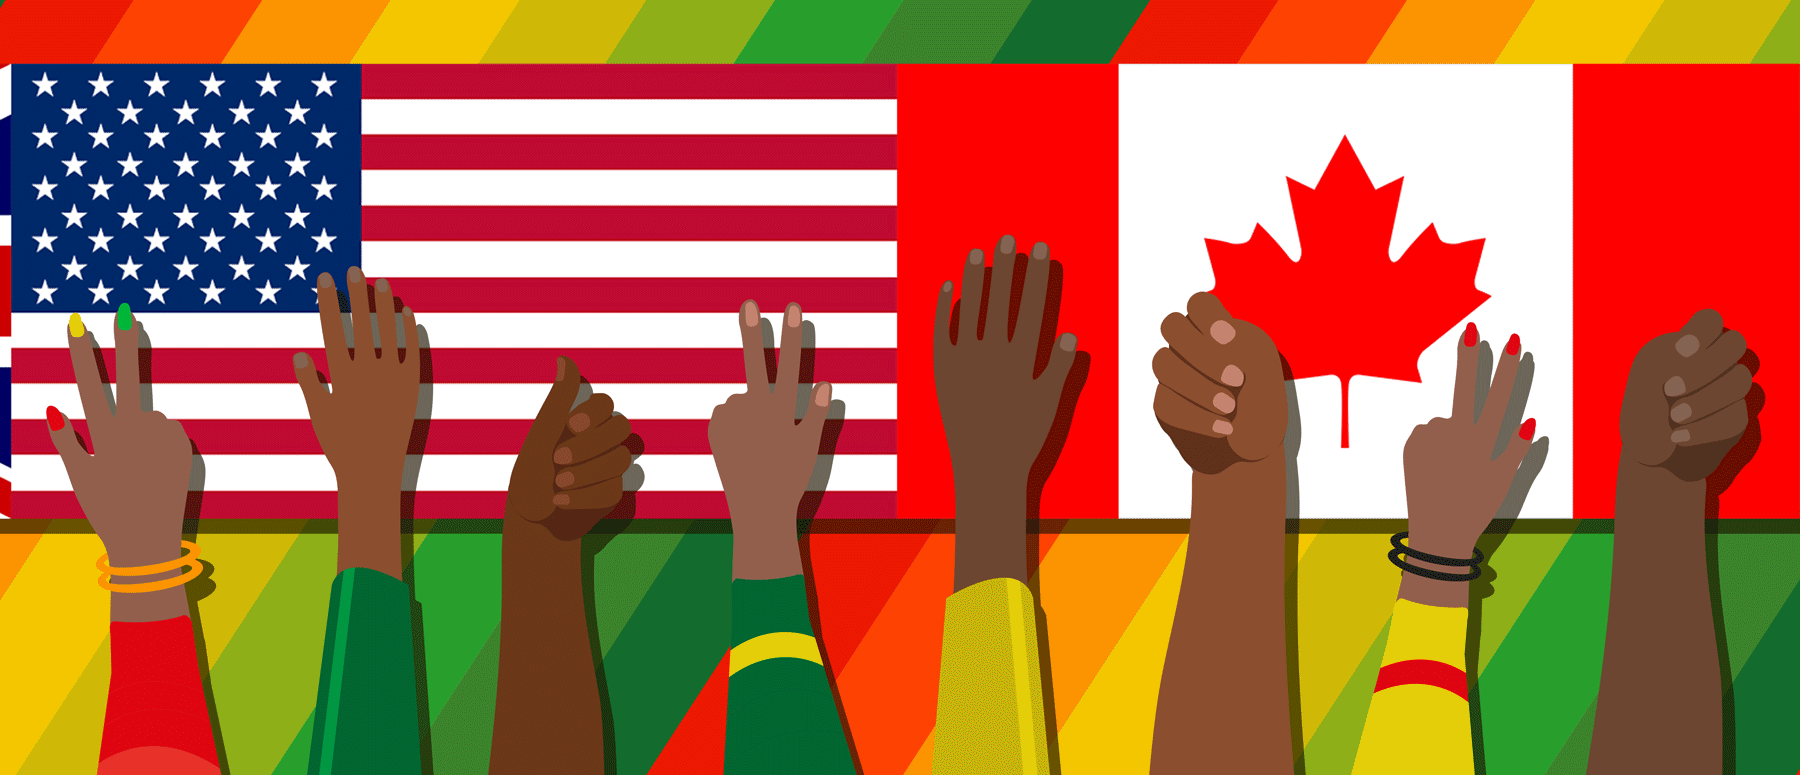 Eight hands raised in front of scrolling U.S, Canadian, UK, Irish, and Dutch flags.